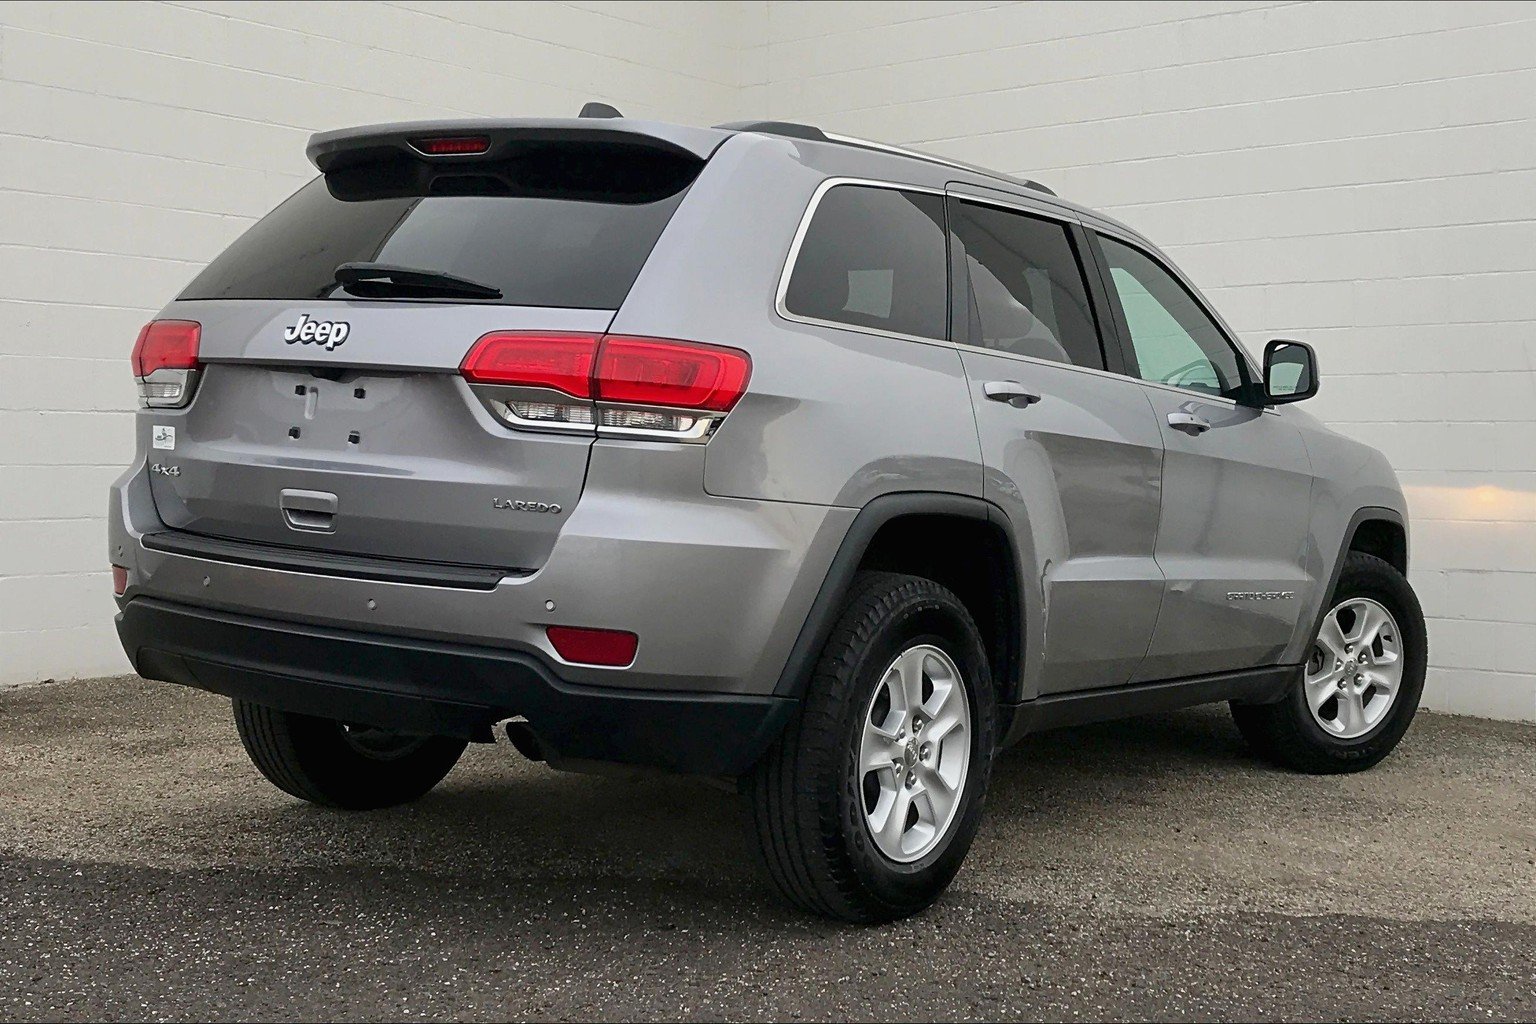 PreOwned 2016 Jeep Grand Cherokee 4WD 4dr Laredo 4D Sport Utility in